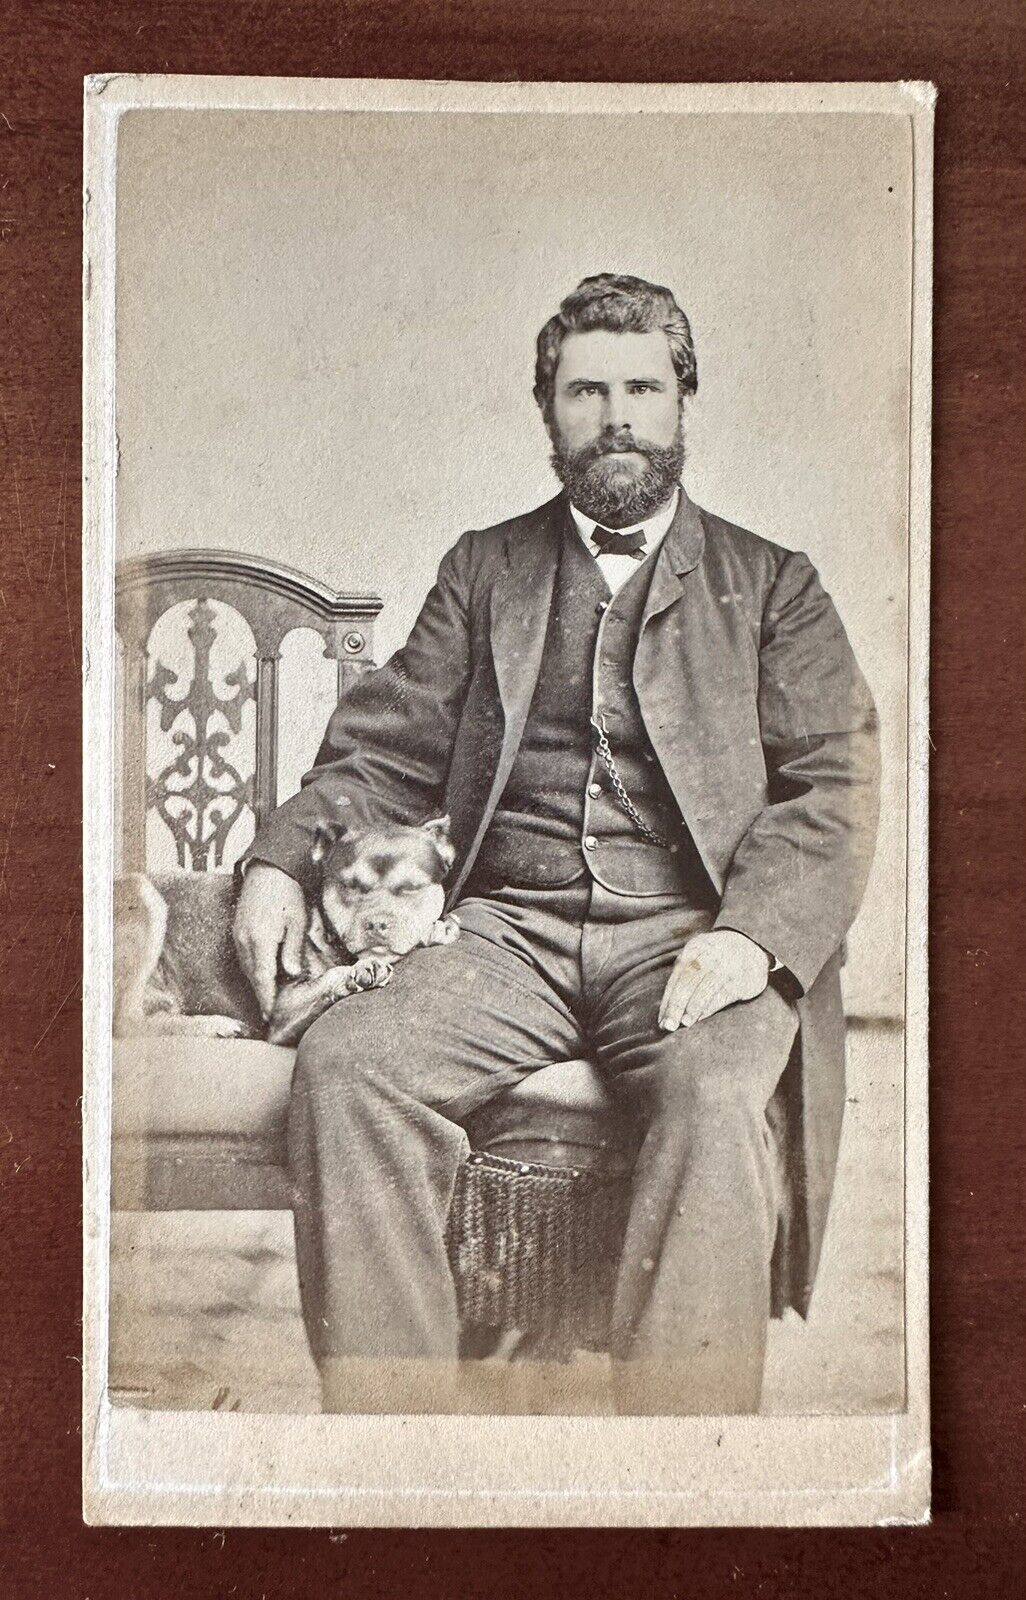 Handsome Bearded Man Dog In Lap New Orleans Photographer 1860s CDV Photo